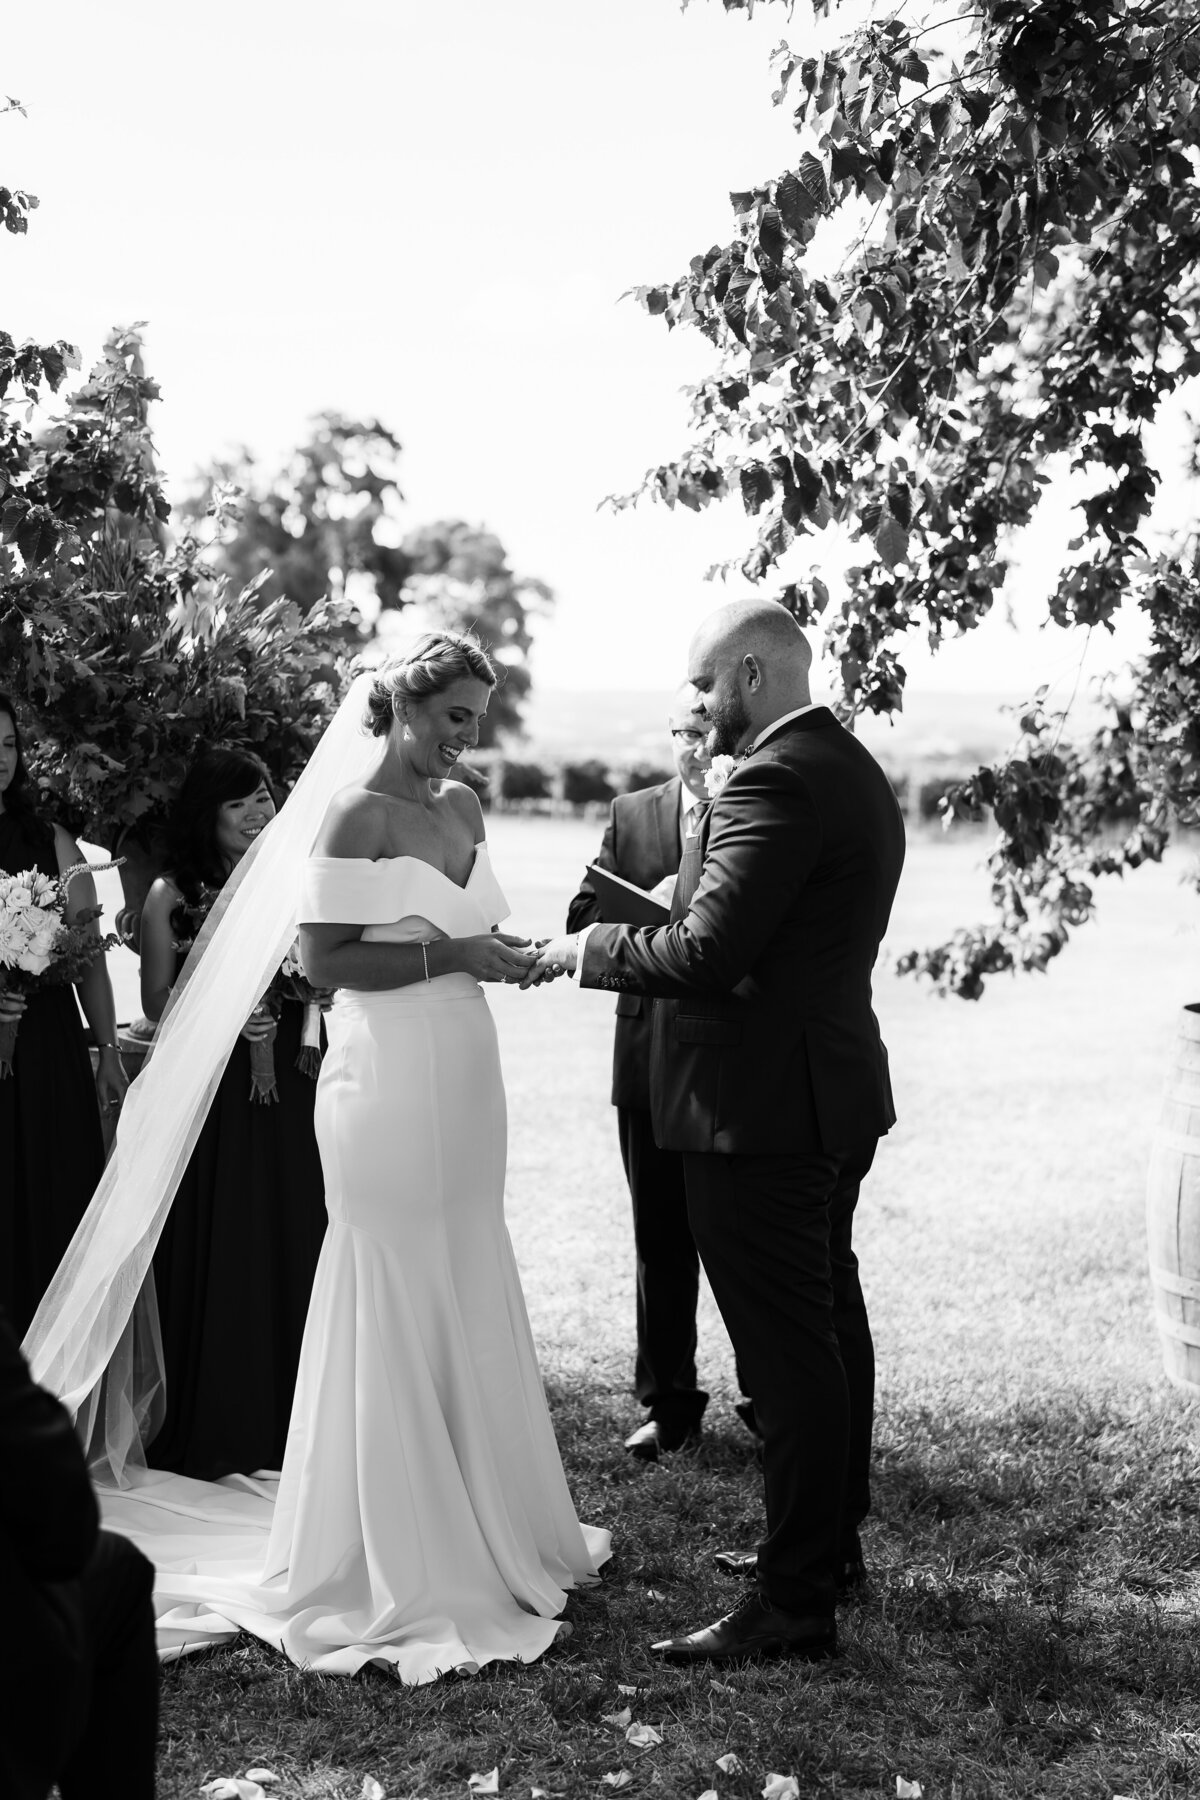 Courtney Laura Photography, Stones of the Yarra Valley, Yarra Valley Weddings Photographer, Samantha and Kyle-383